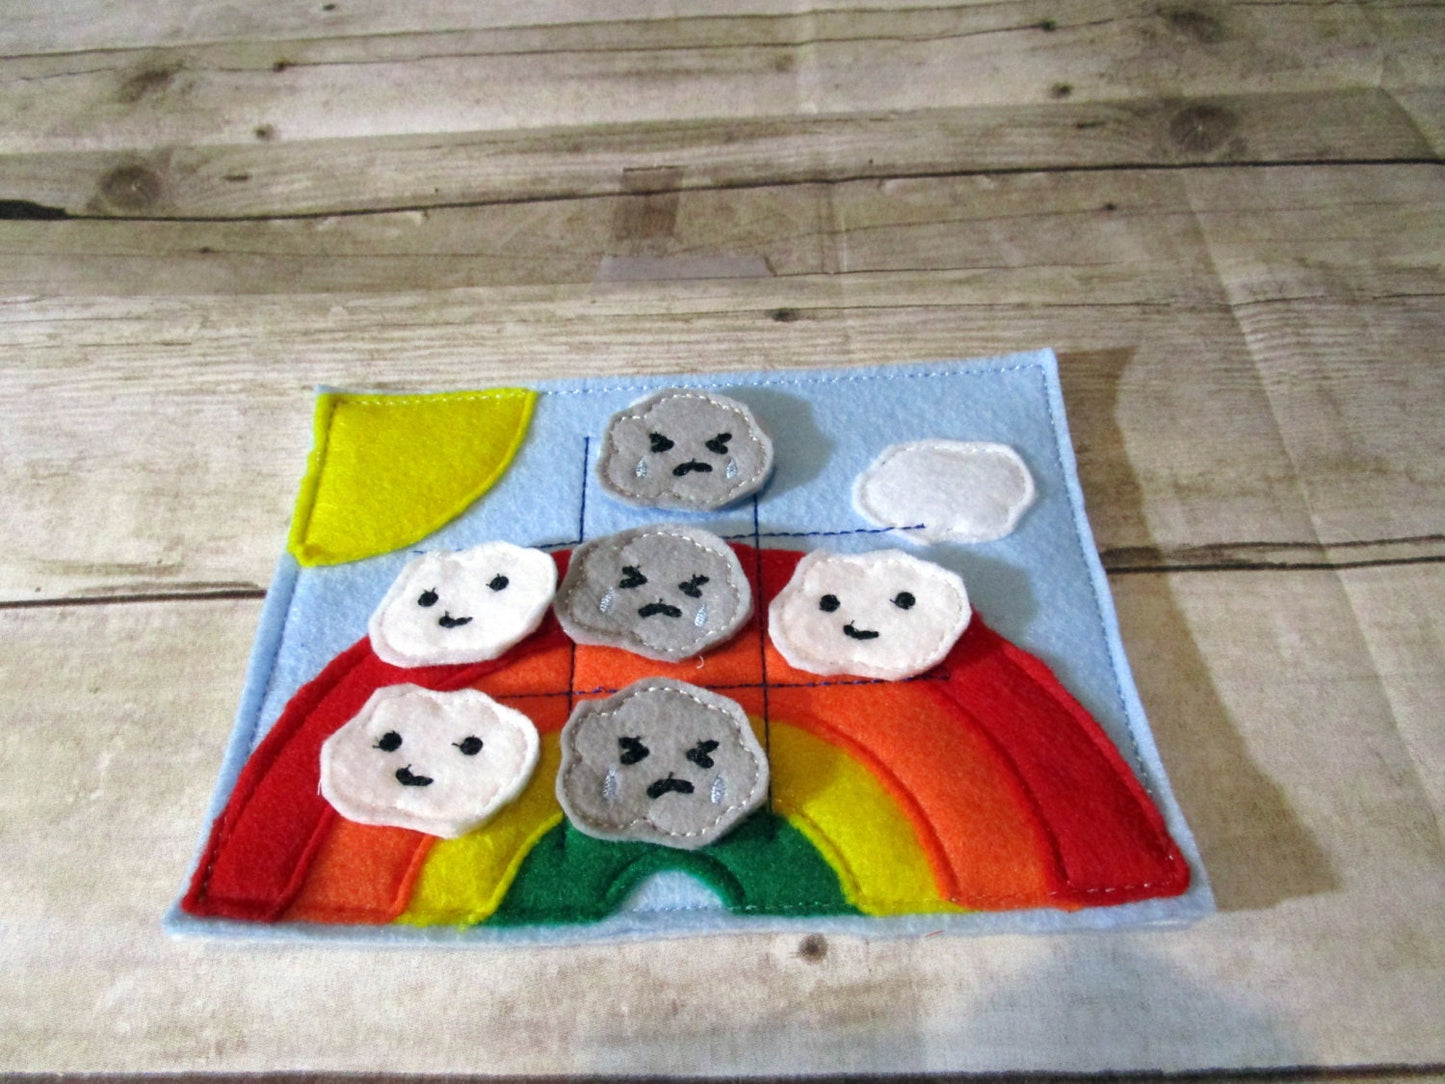 Handcrafted rainbow theme tic tac toe game for boys and girls. Can be used as a gift or party favor.